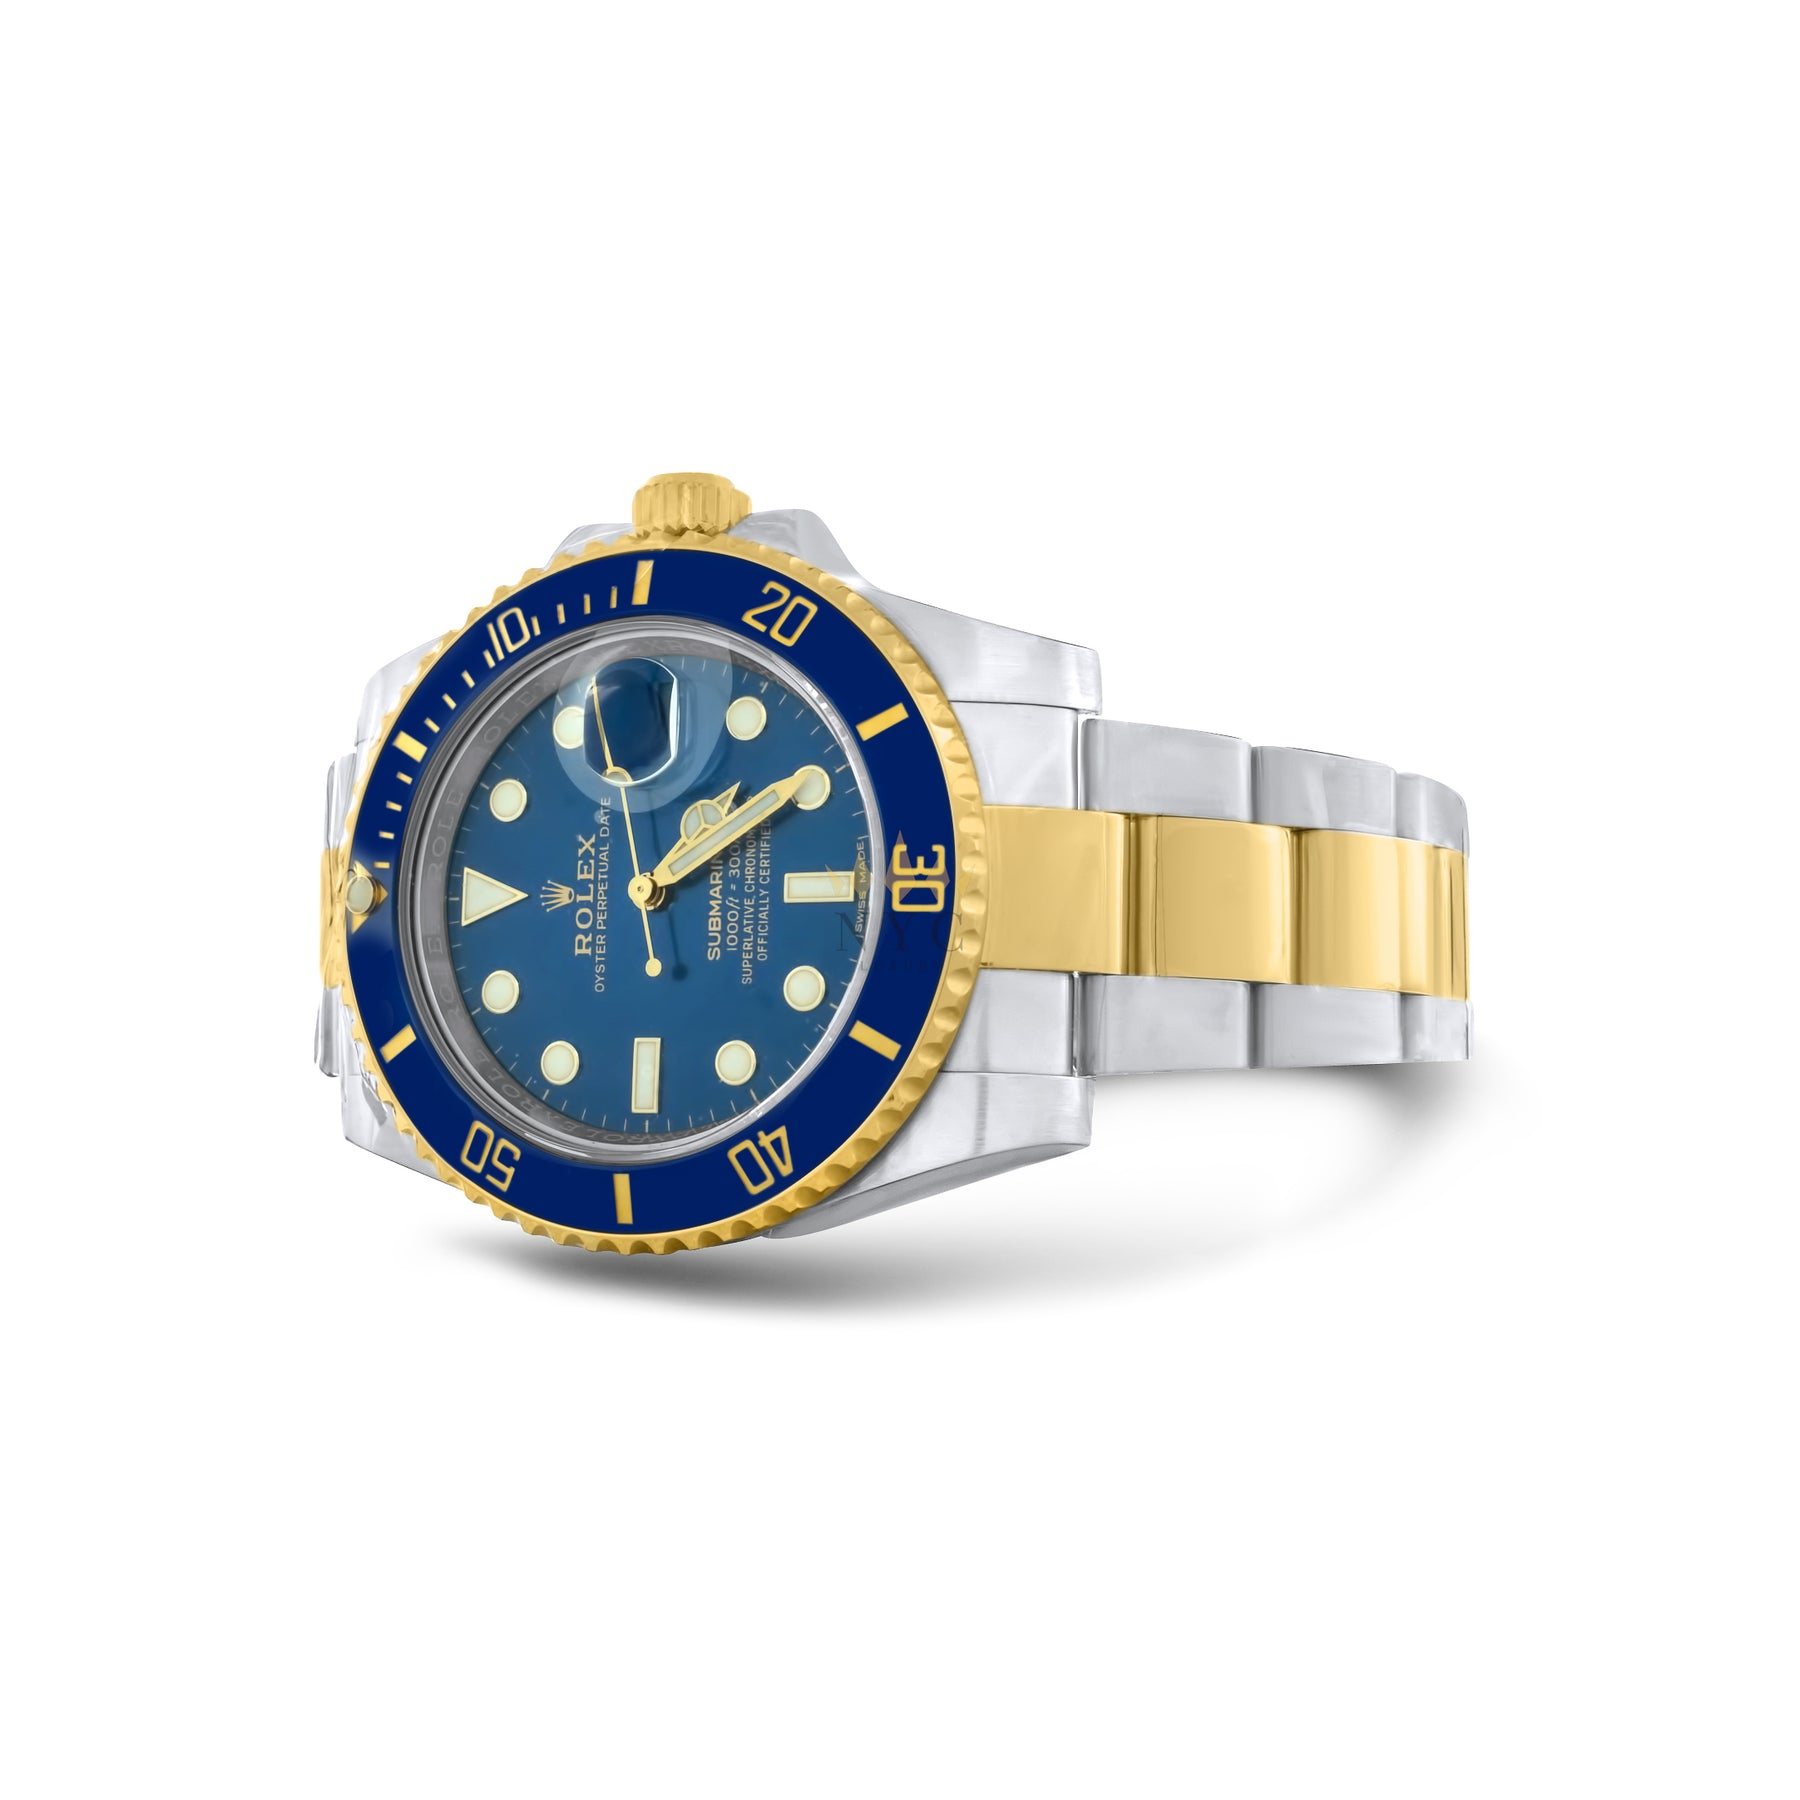 Rolex Submariner Two-Tone Yellow Gold And Stainless-Steel, 40mm case, Blue  Dial, Ceramic Bezel, Ref. 116613 Discontinued Model